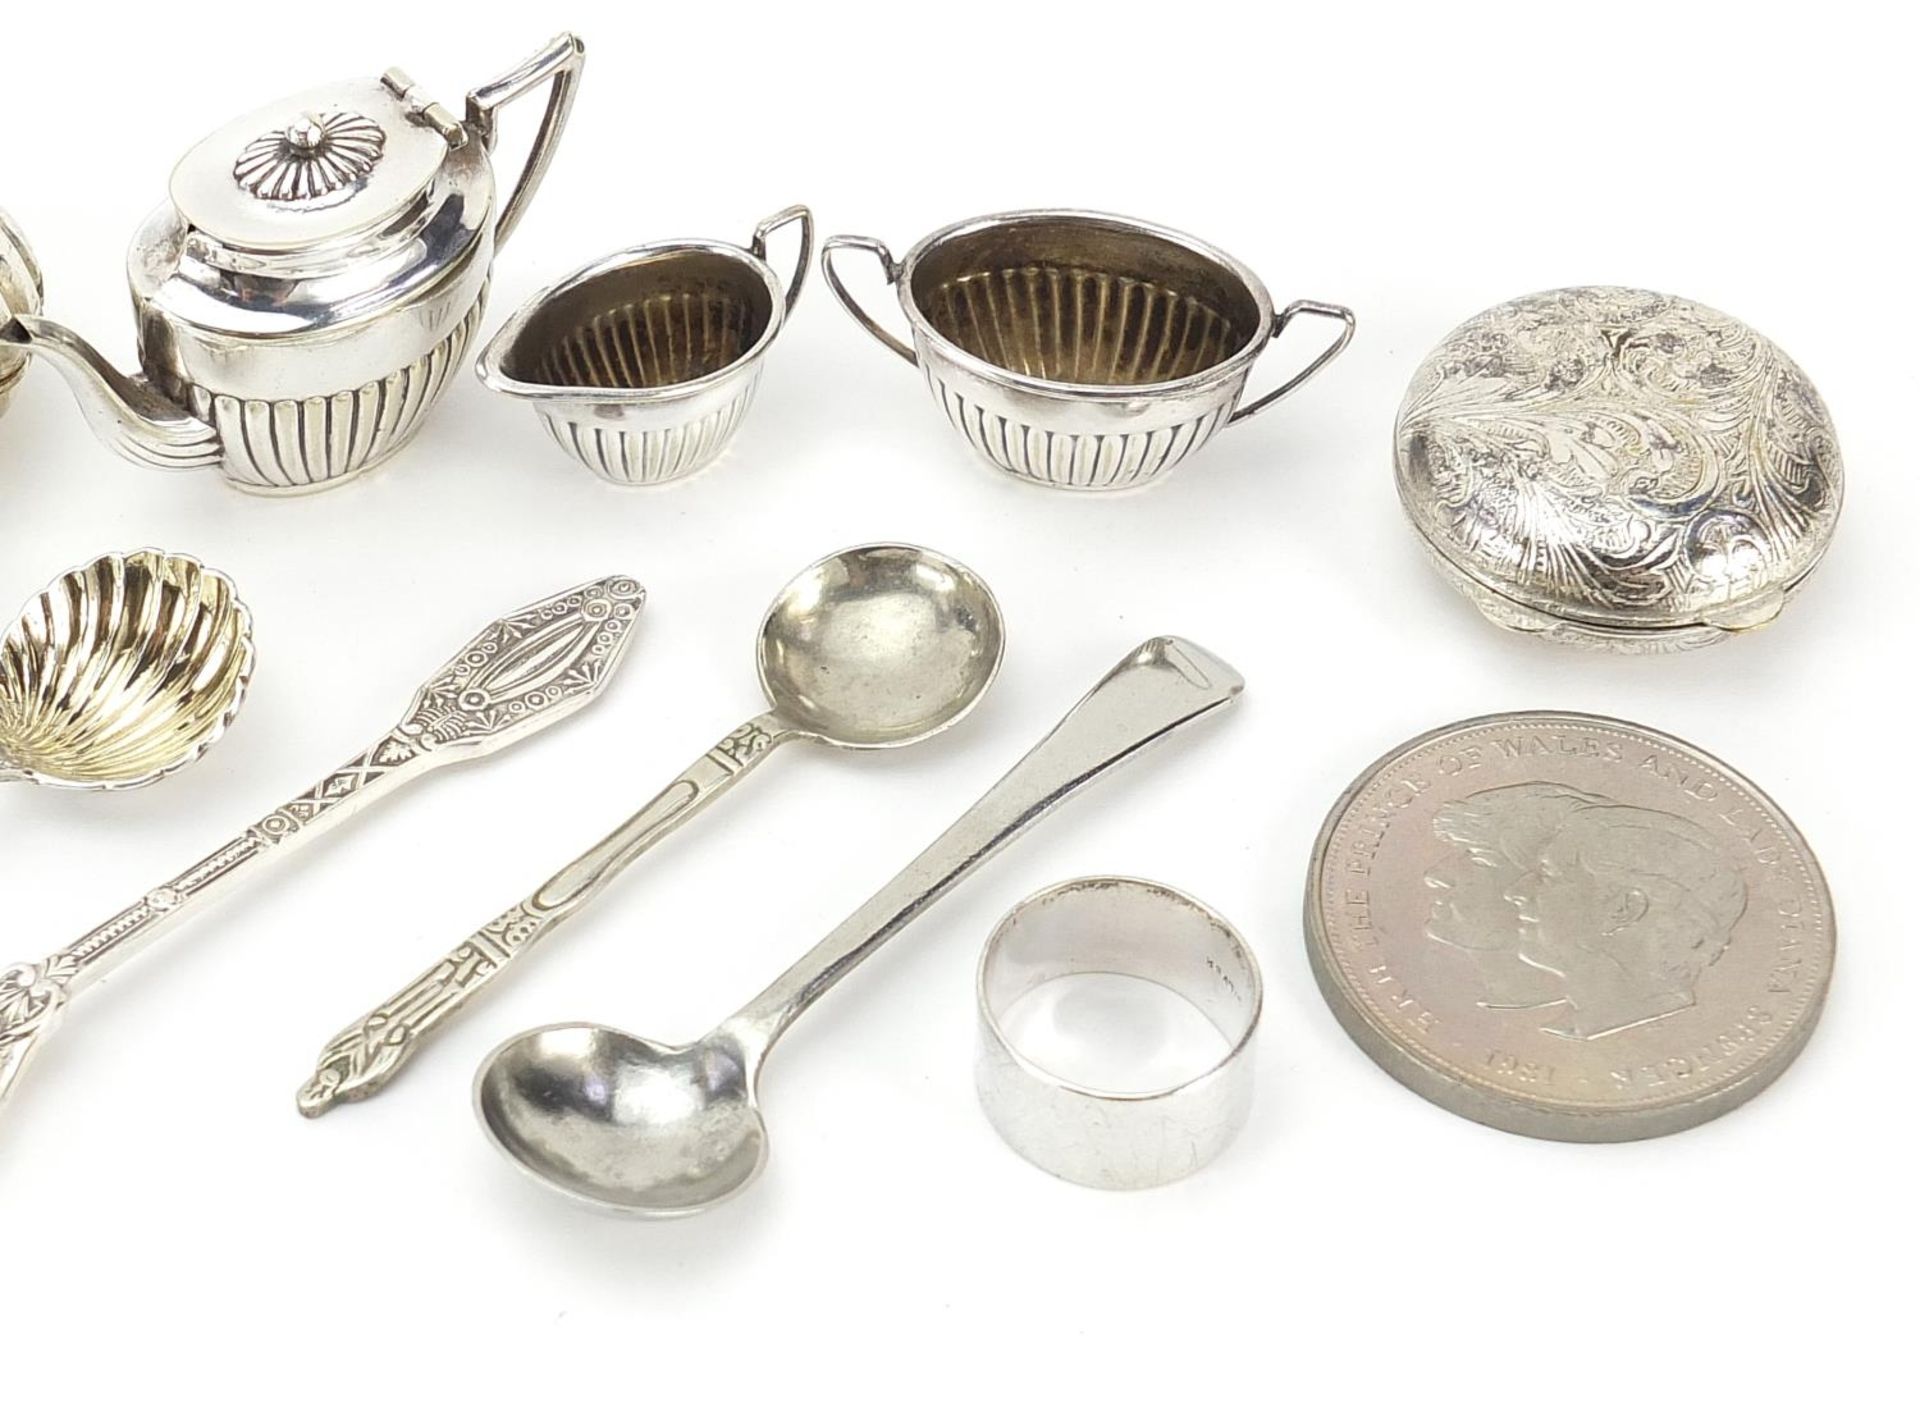 Silver plated and white metal objects including doll's house tea service, pill boxes and mustard - Image 3 of 4